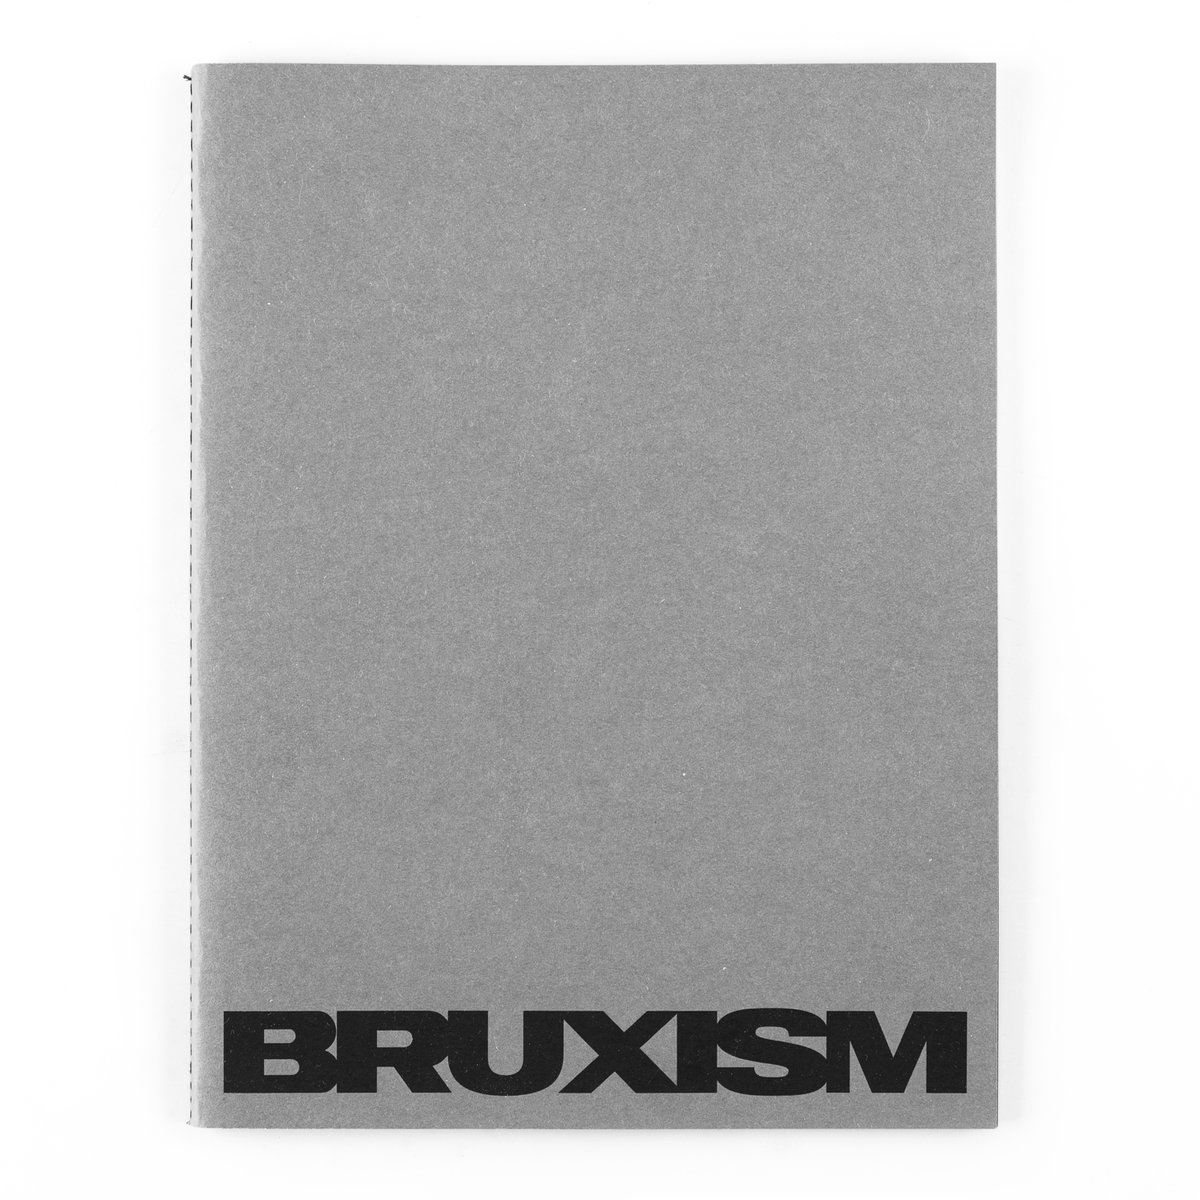 Image of BRUXISM by Archie Finch & Bruxism